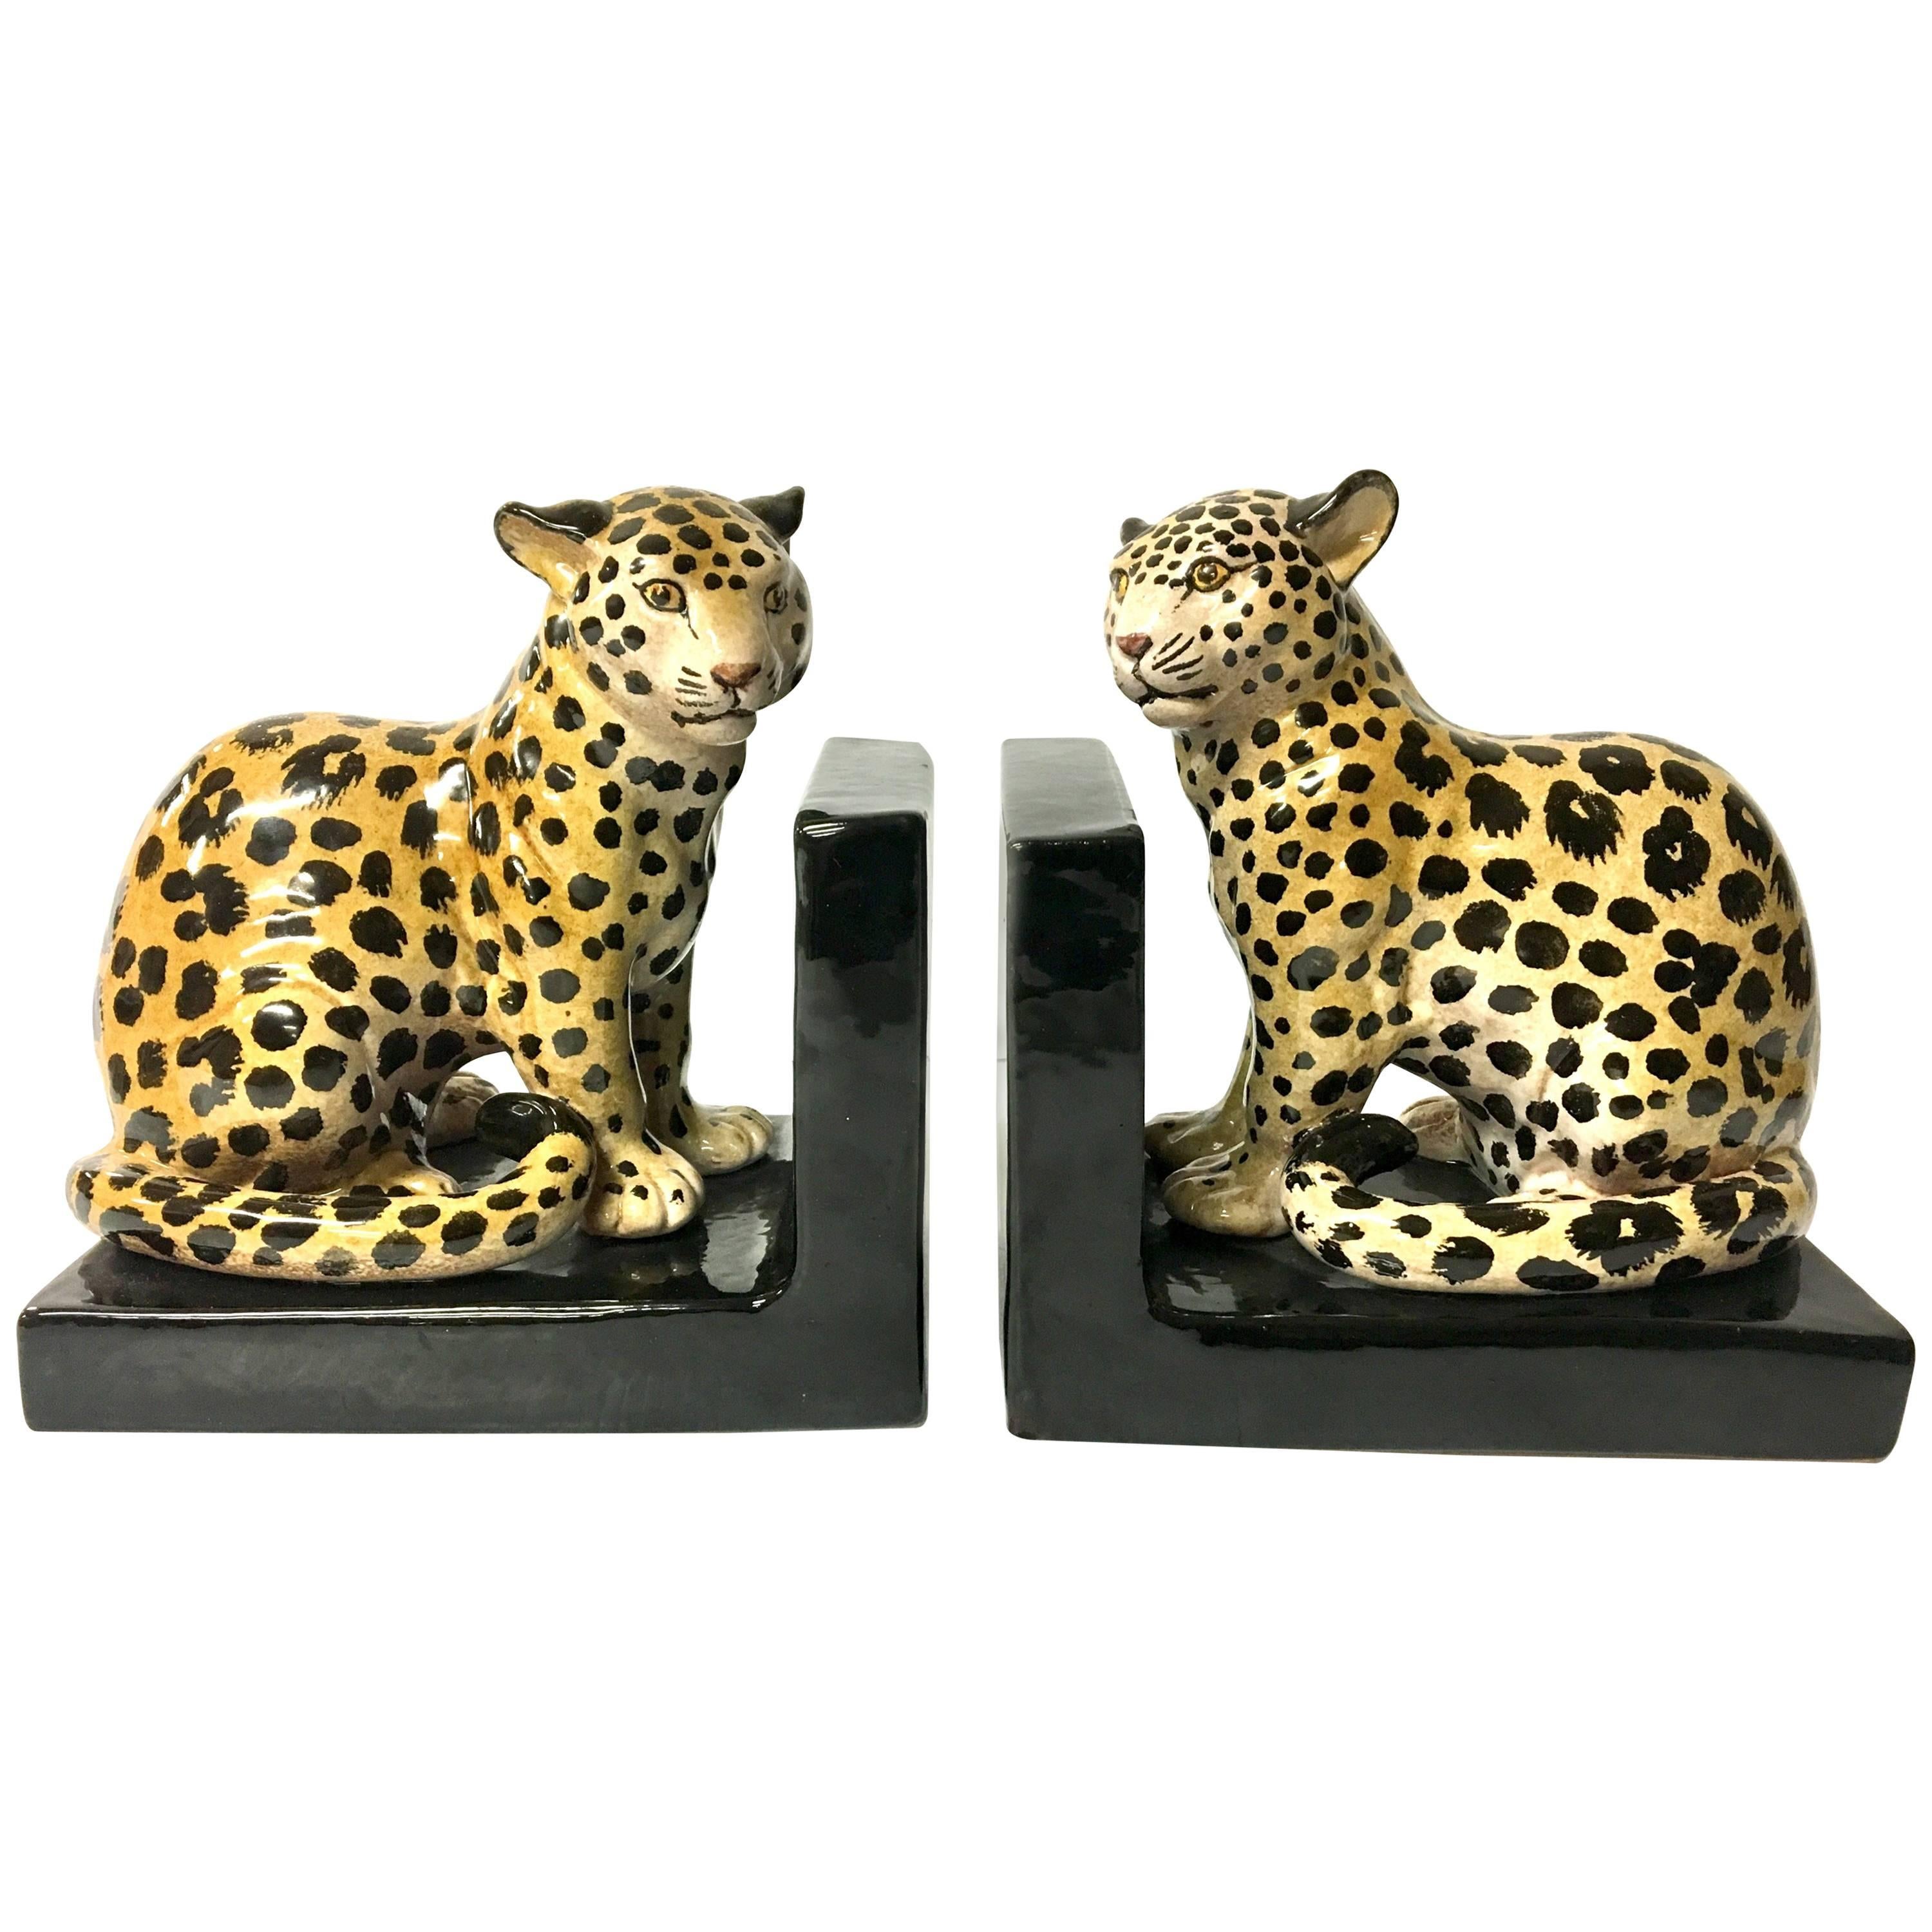 Pair of Italian Bookends with Leopards in Ceramic